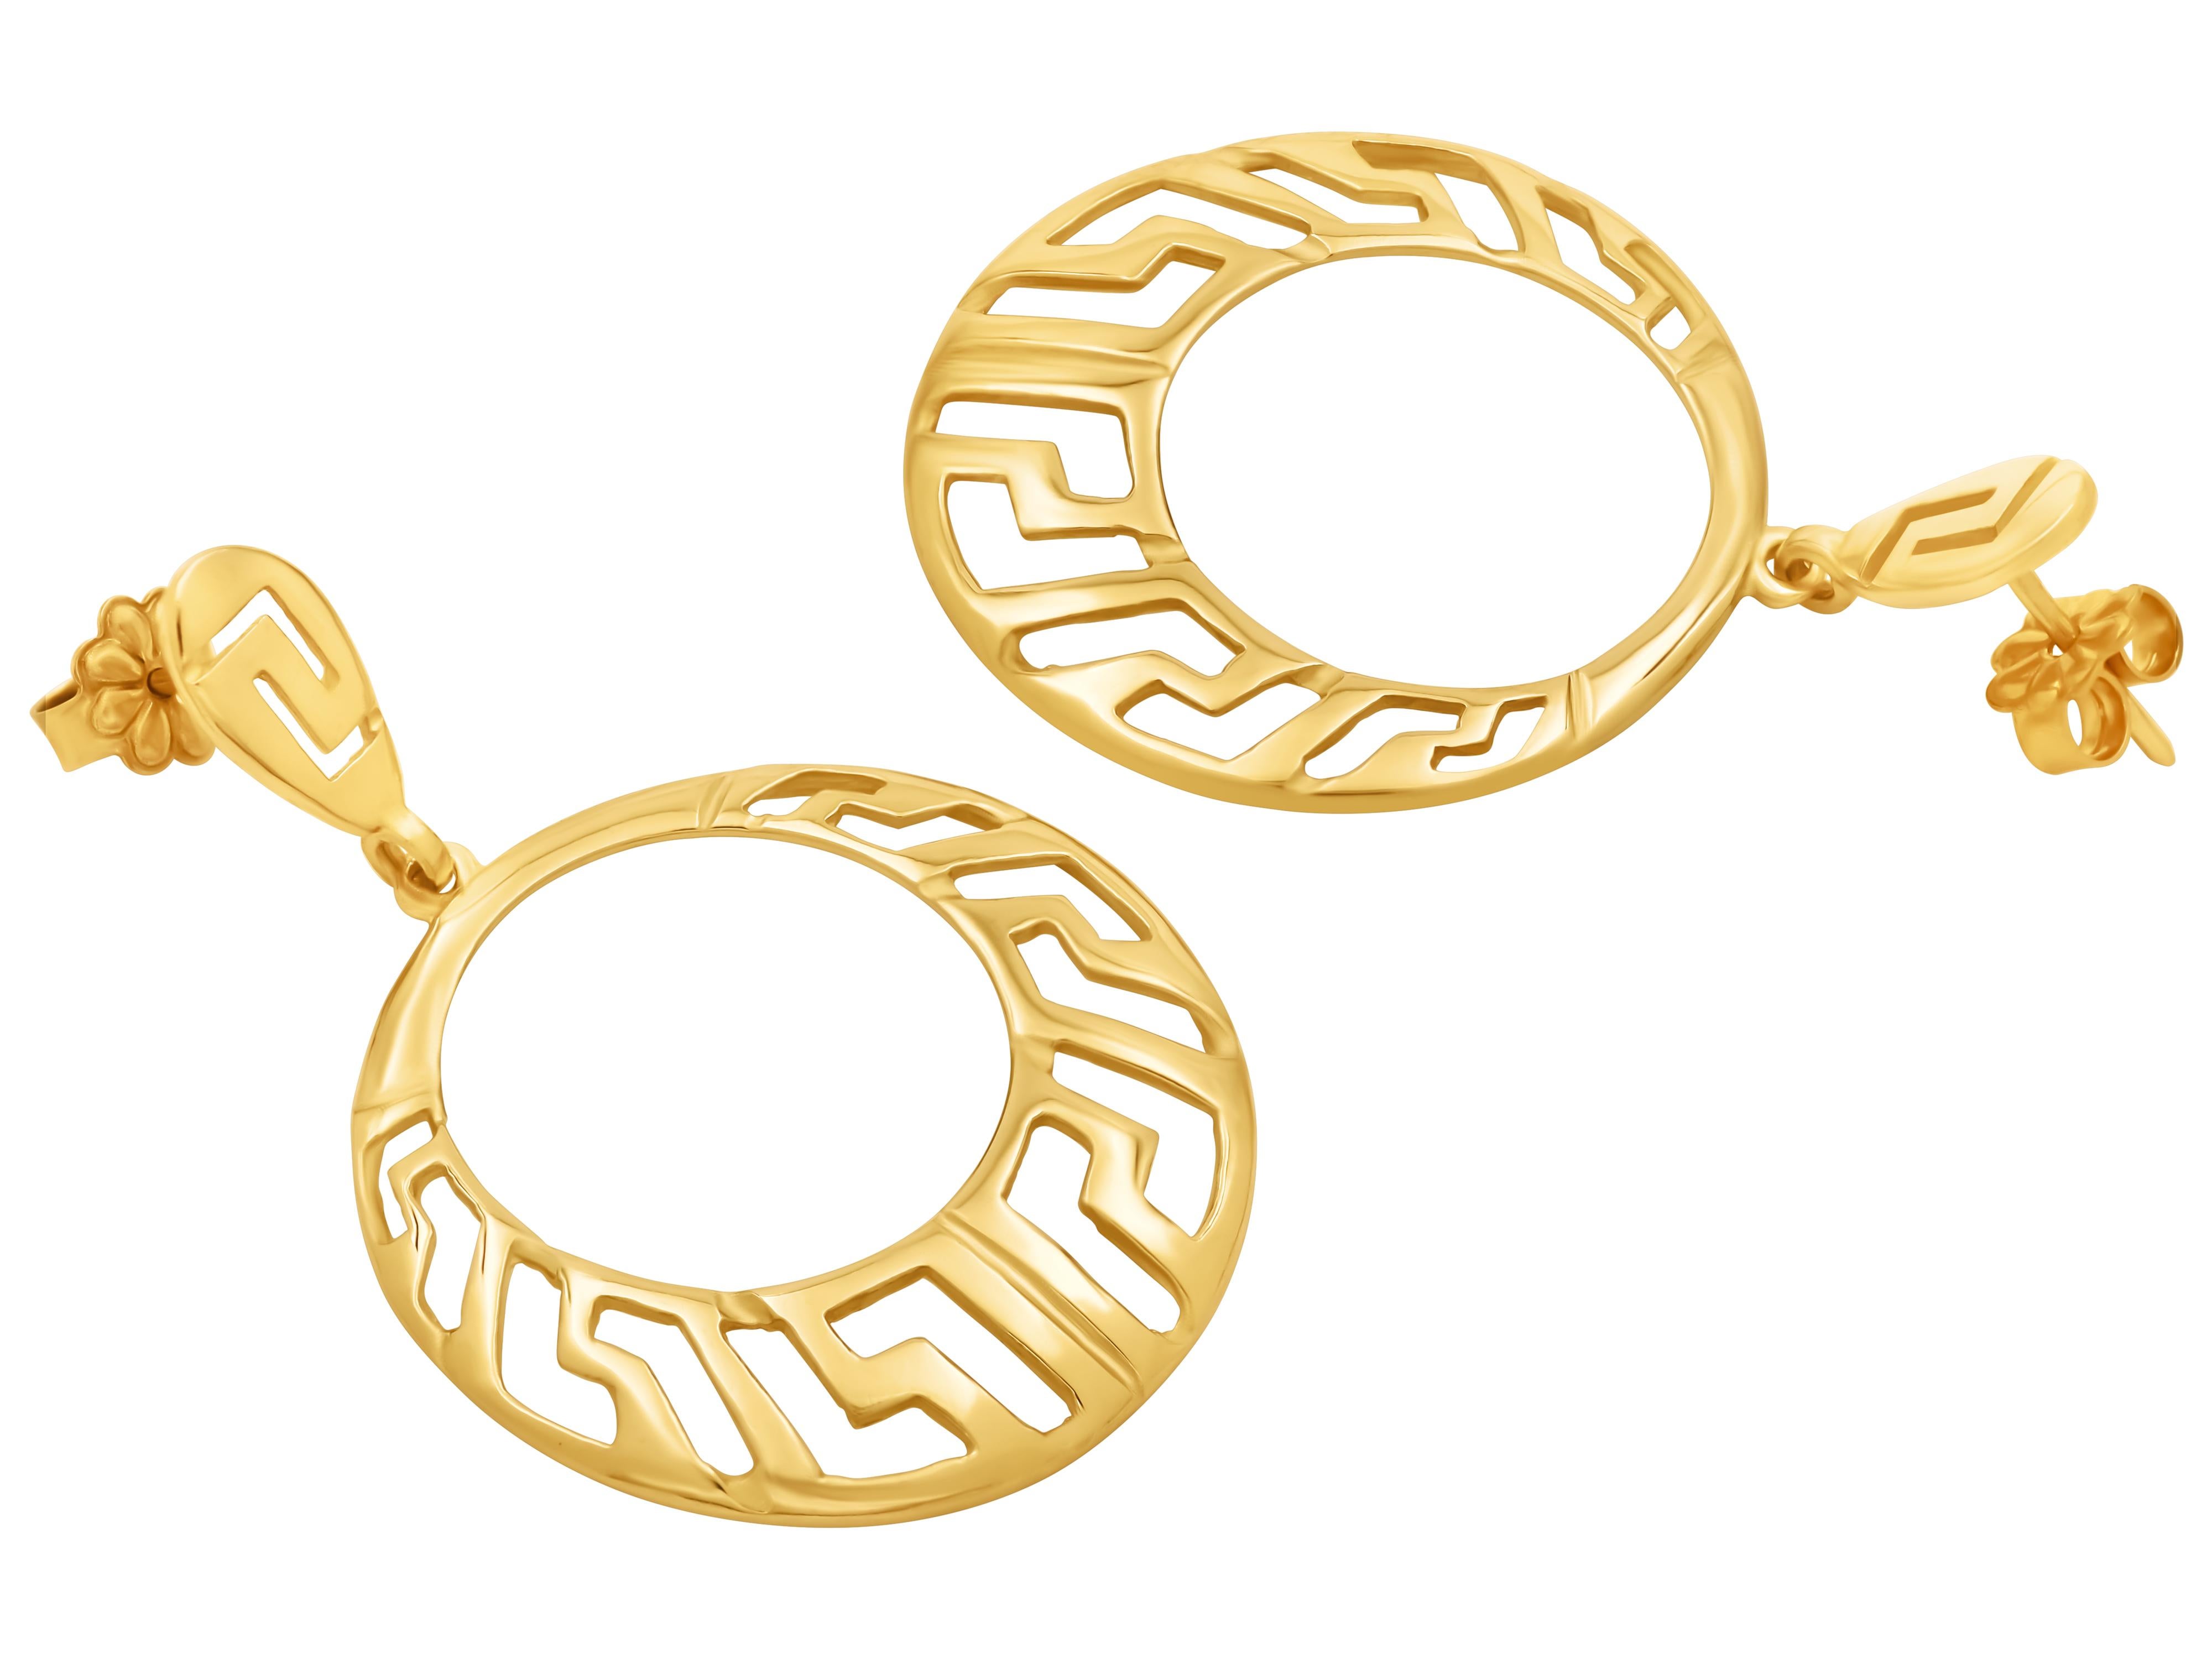 Greek key circle earrings in 18k yellow gold. Unique and not commercial piece with depth and character. A not small size but very light in the eyes due to its openness. Can be made to order in white gold or set with a diamond pave finish. You will